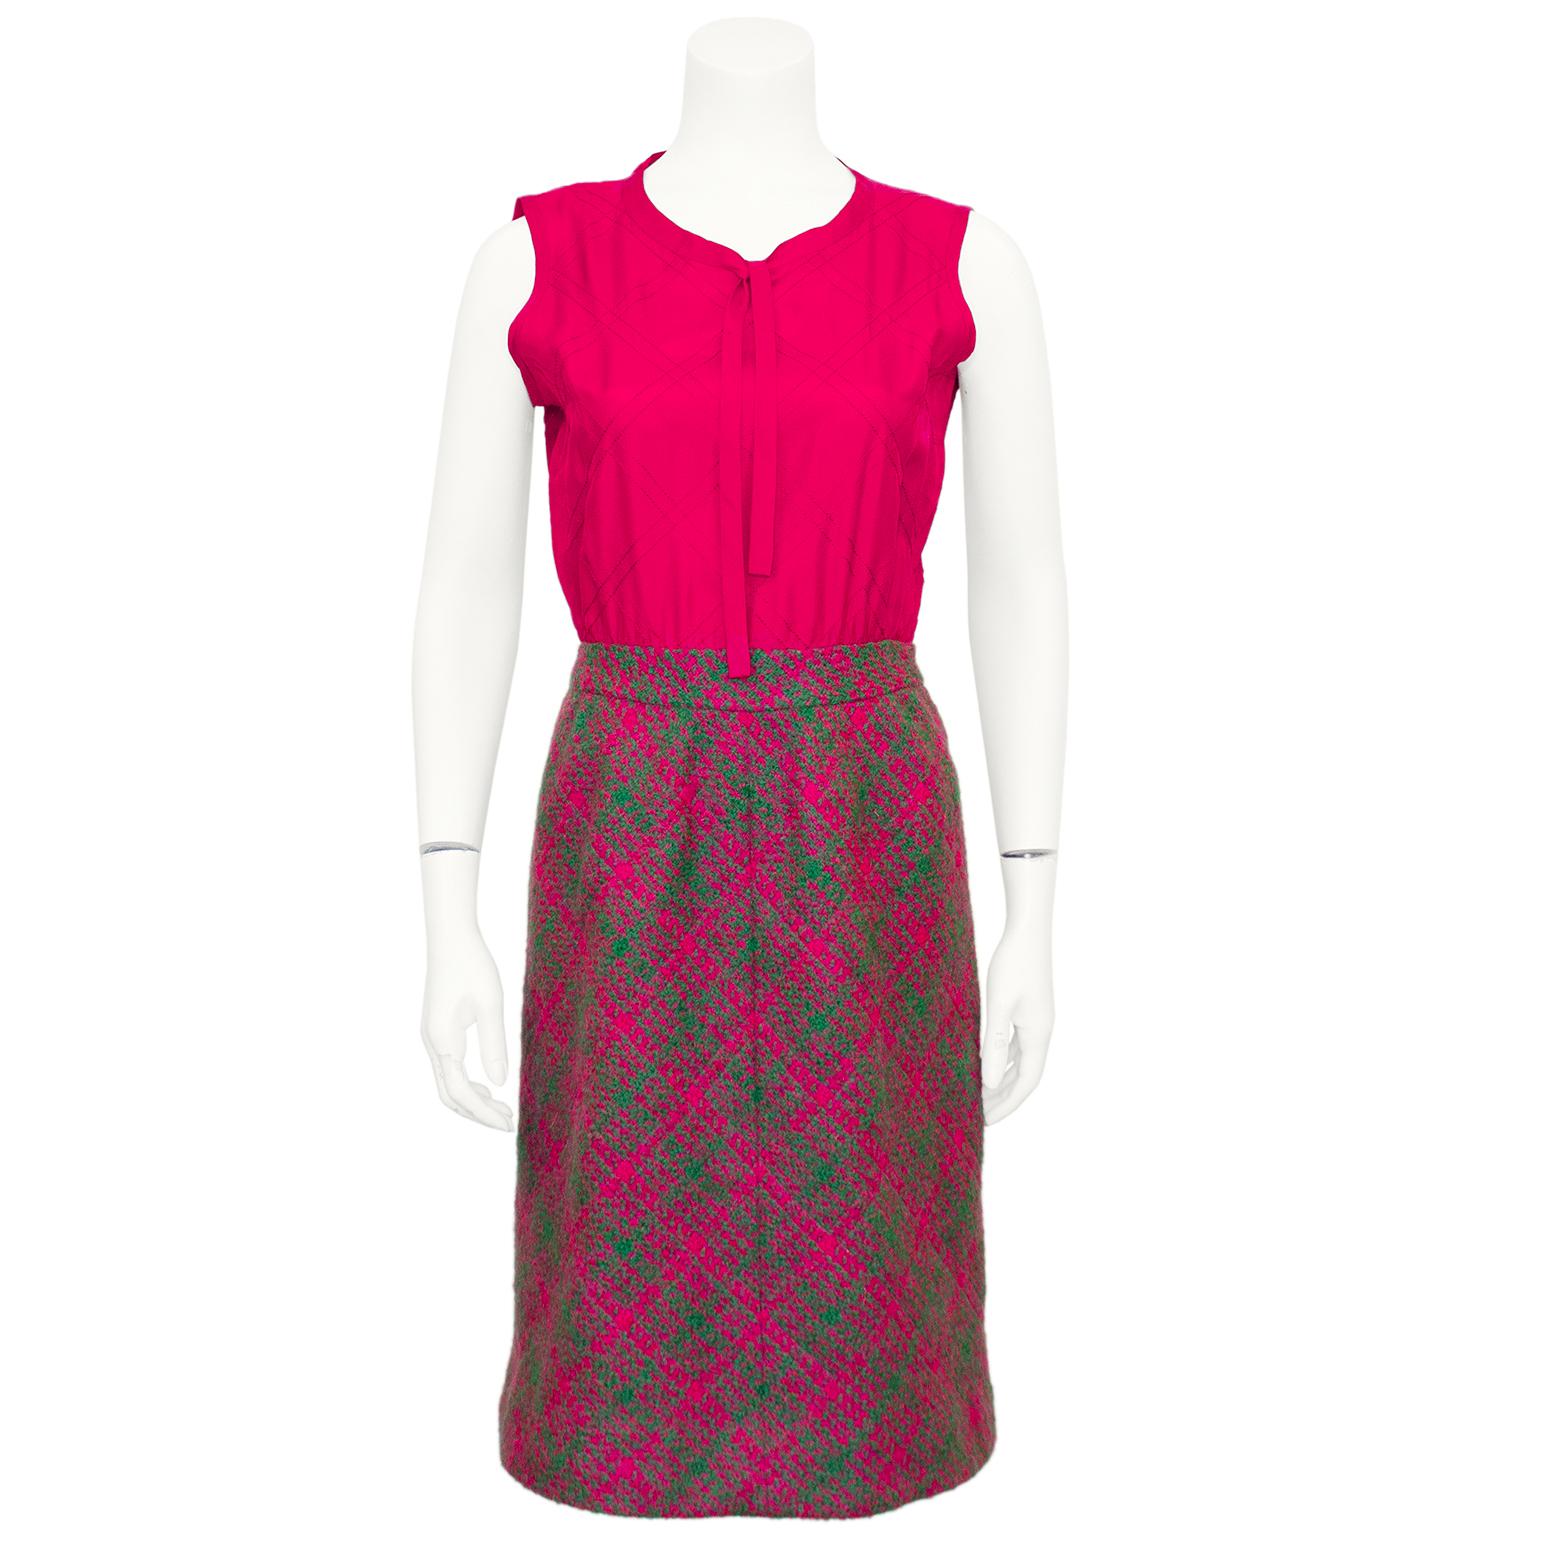 Women's 1960s Chanel Haute Couture Magenta and Green Dress and Jacket Ensemble For Sale